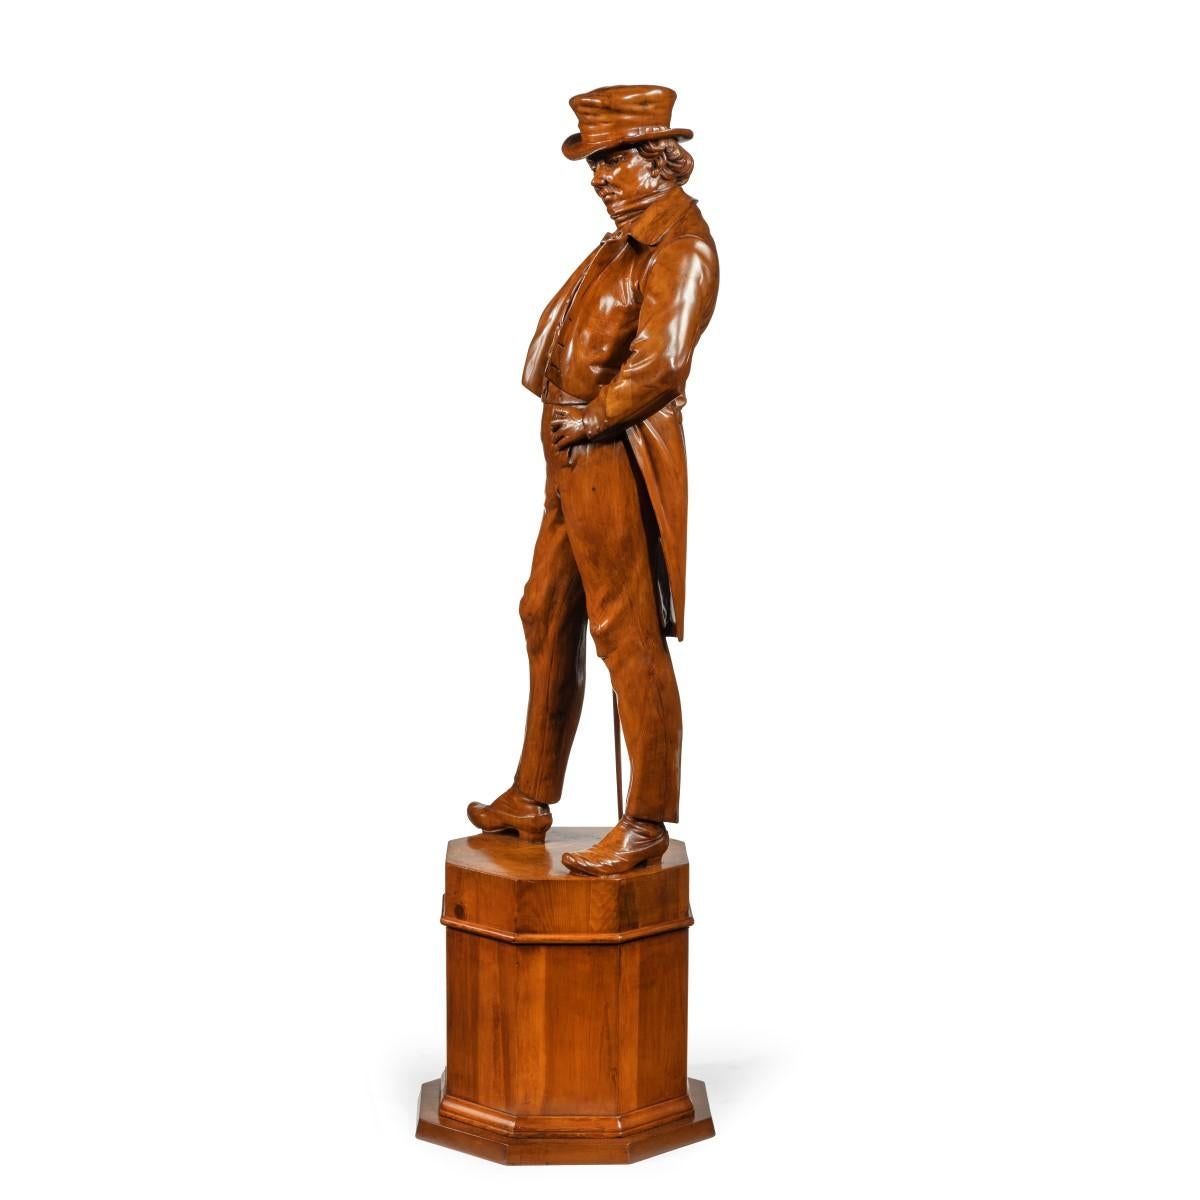 Carved Victorian carved walnut figure of Mark Tapley from the novel by Charles Dickens For Sale